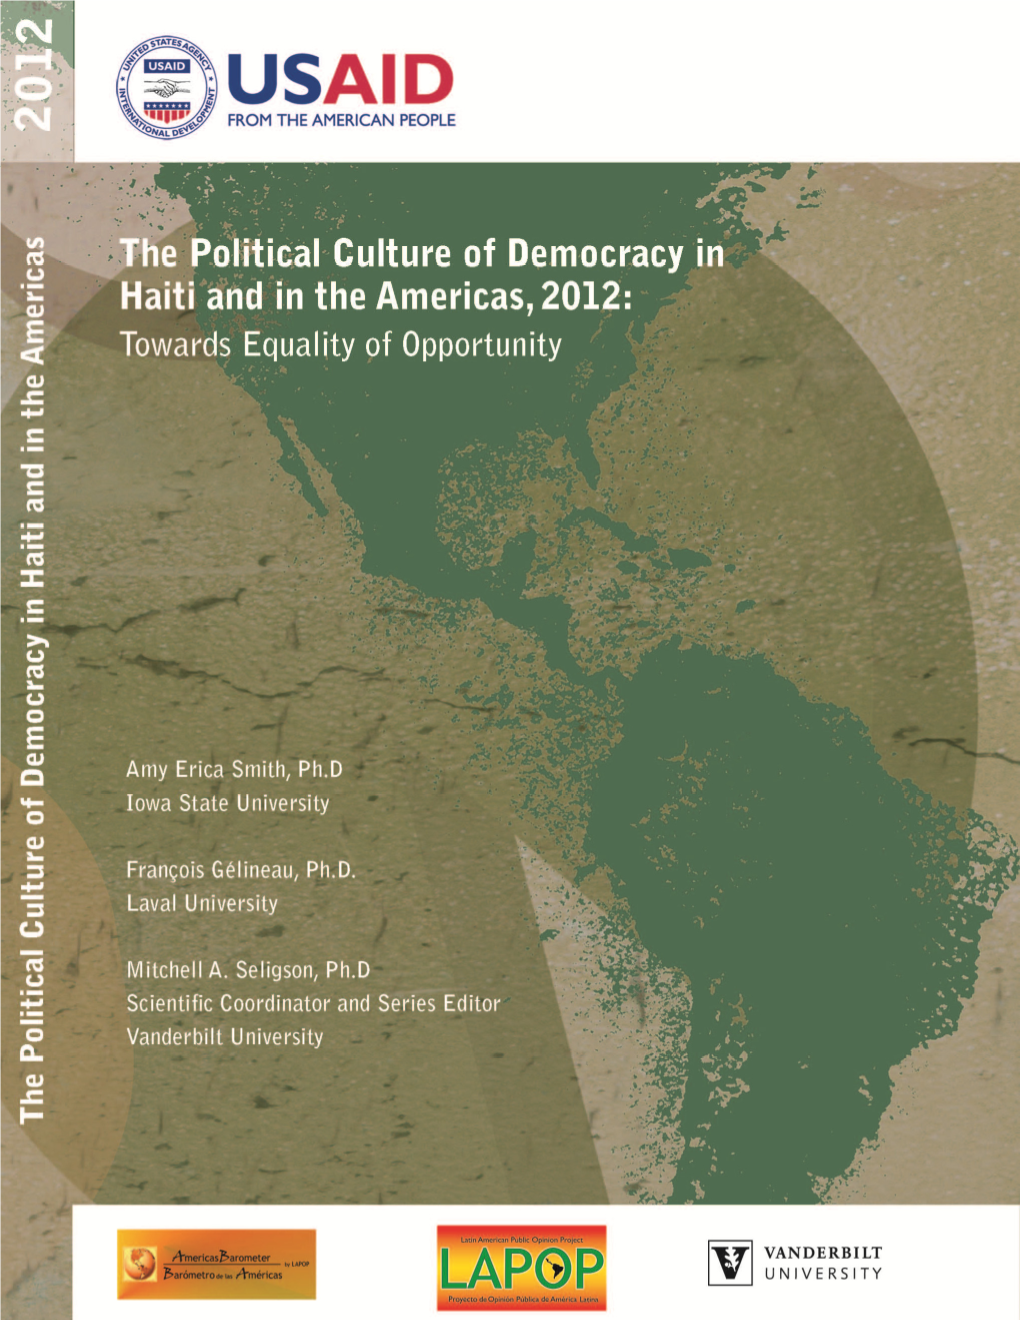 The Political Culture of Democracy in Haiti and in the Americas, 2012